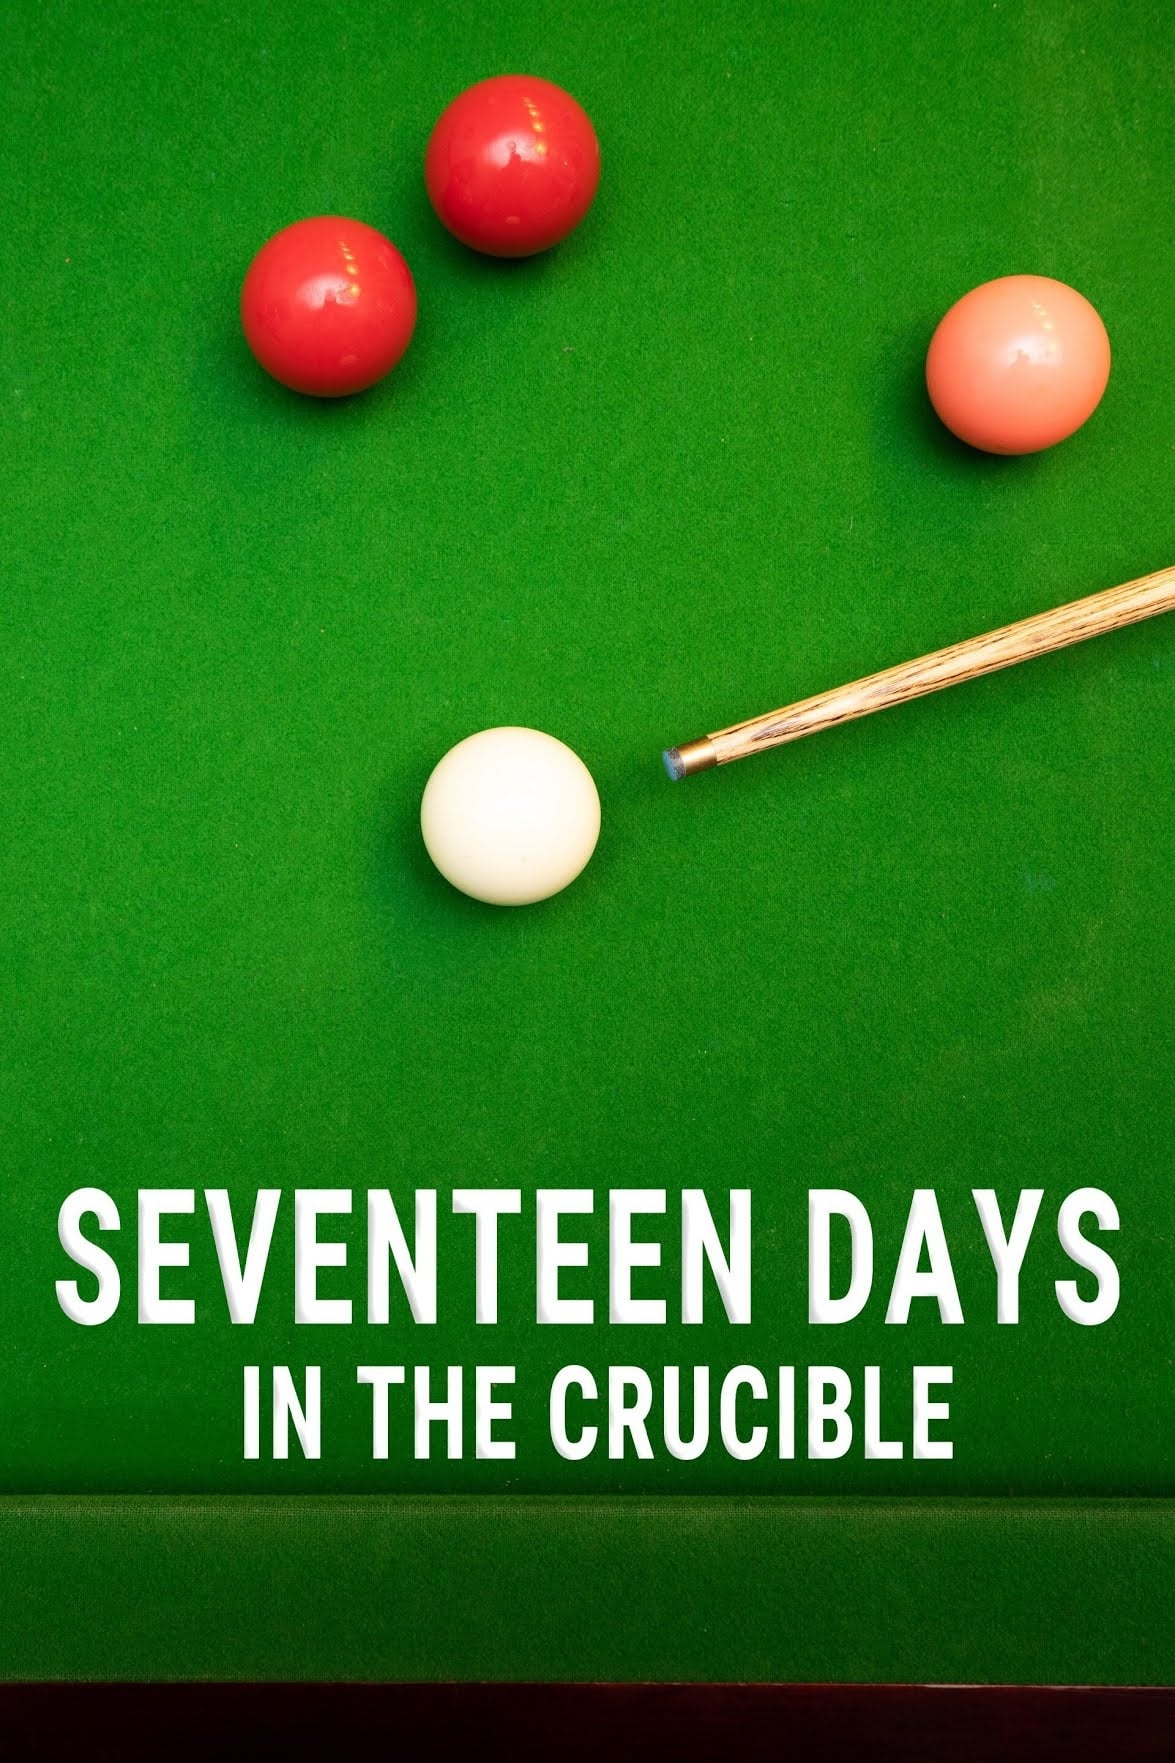 Seventeen days in the Crucible